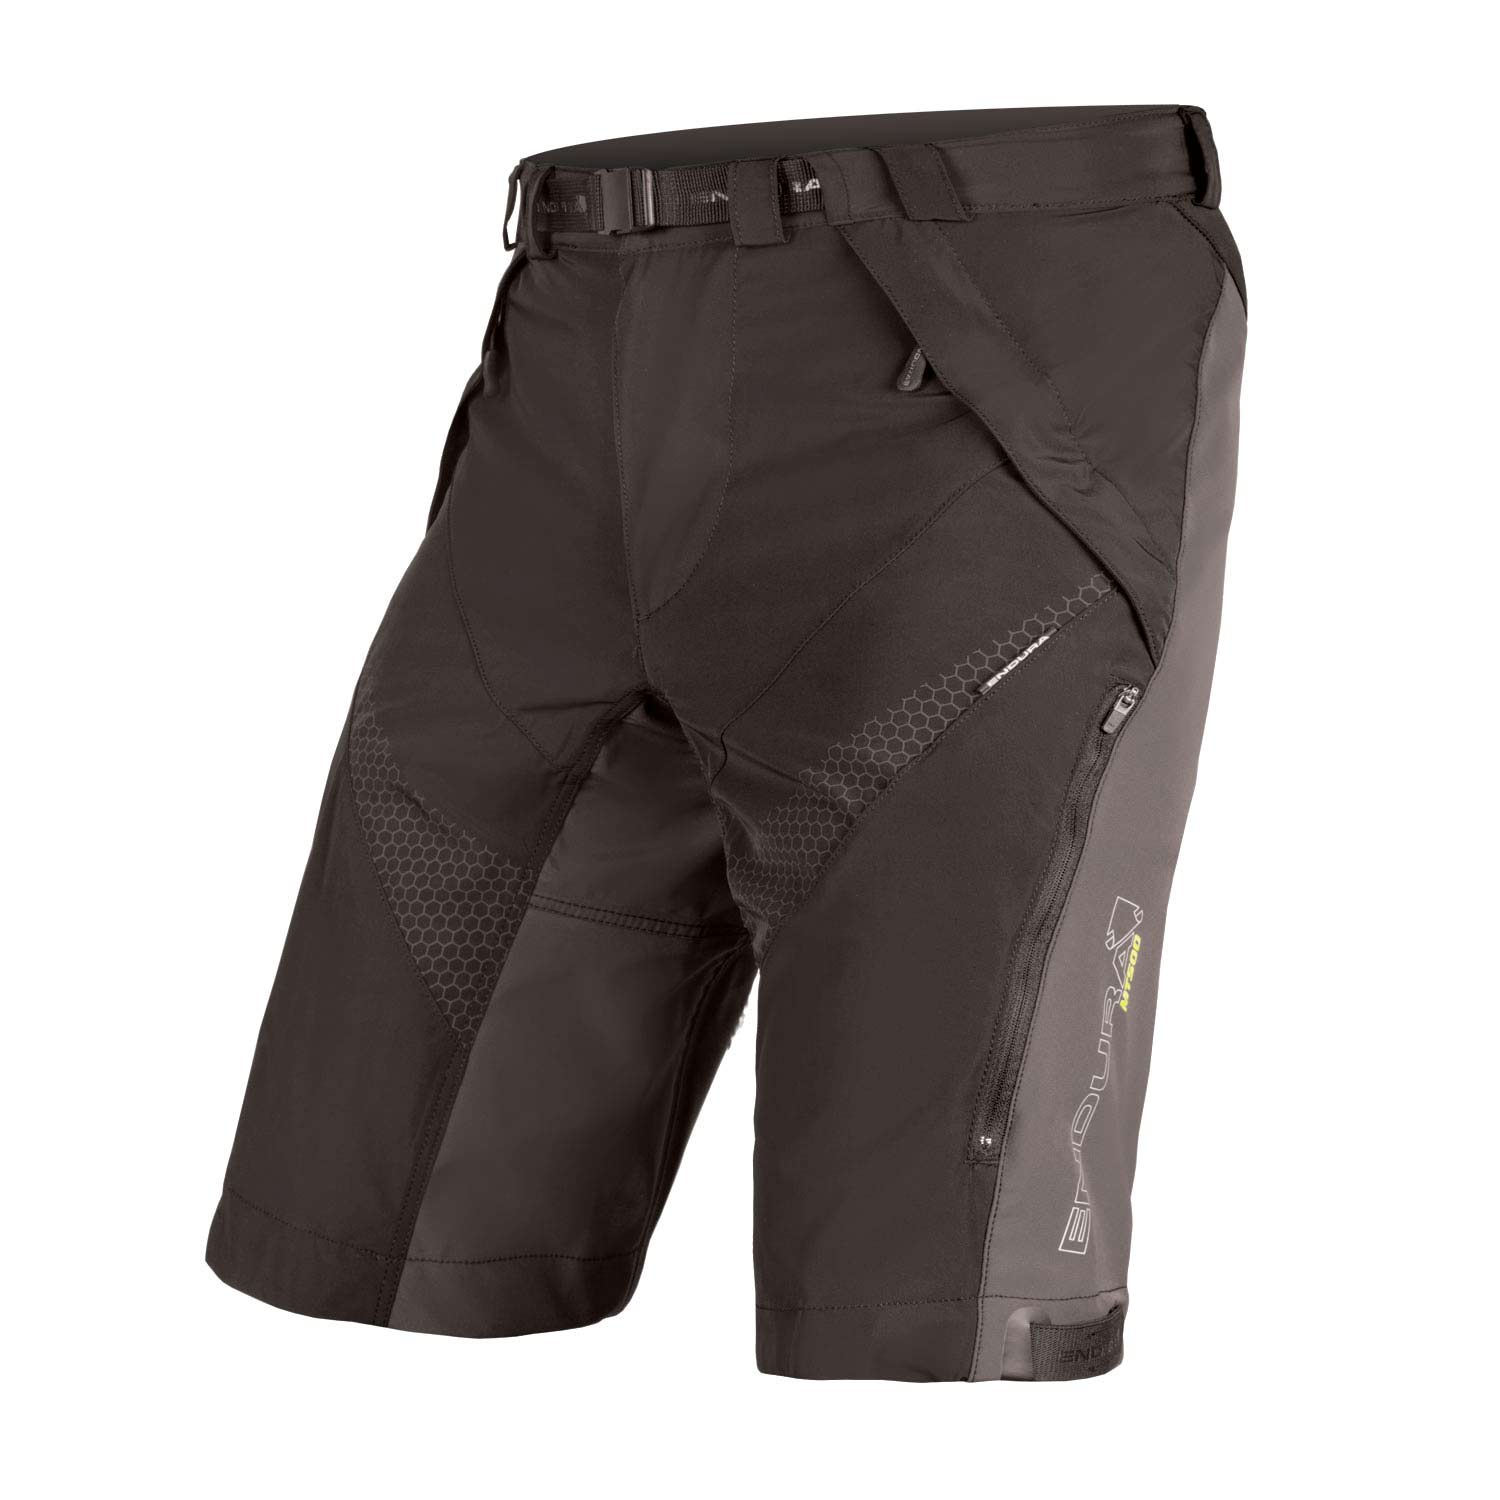 Mt500 spary baggy short nero